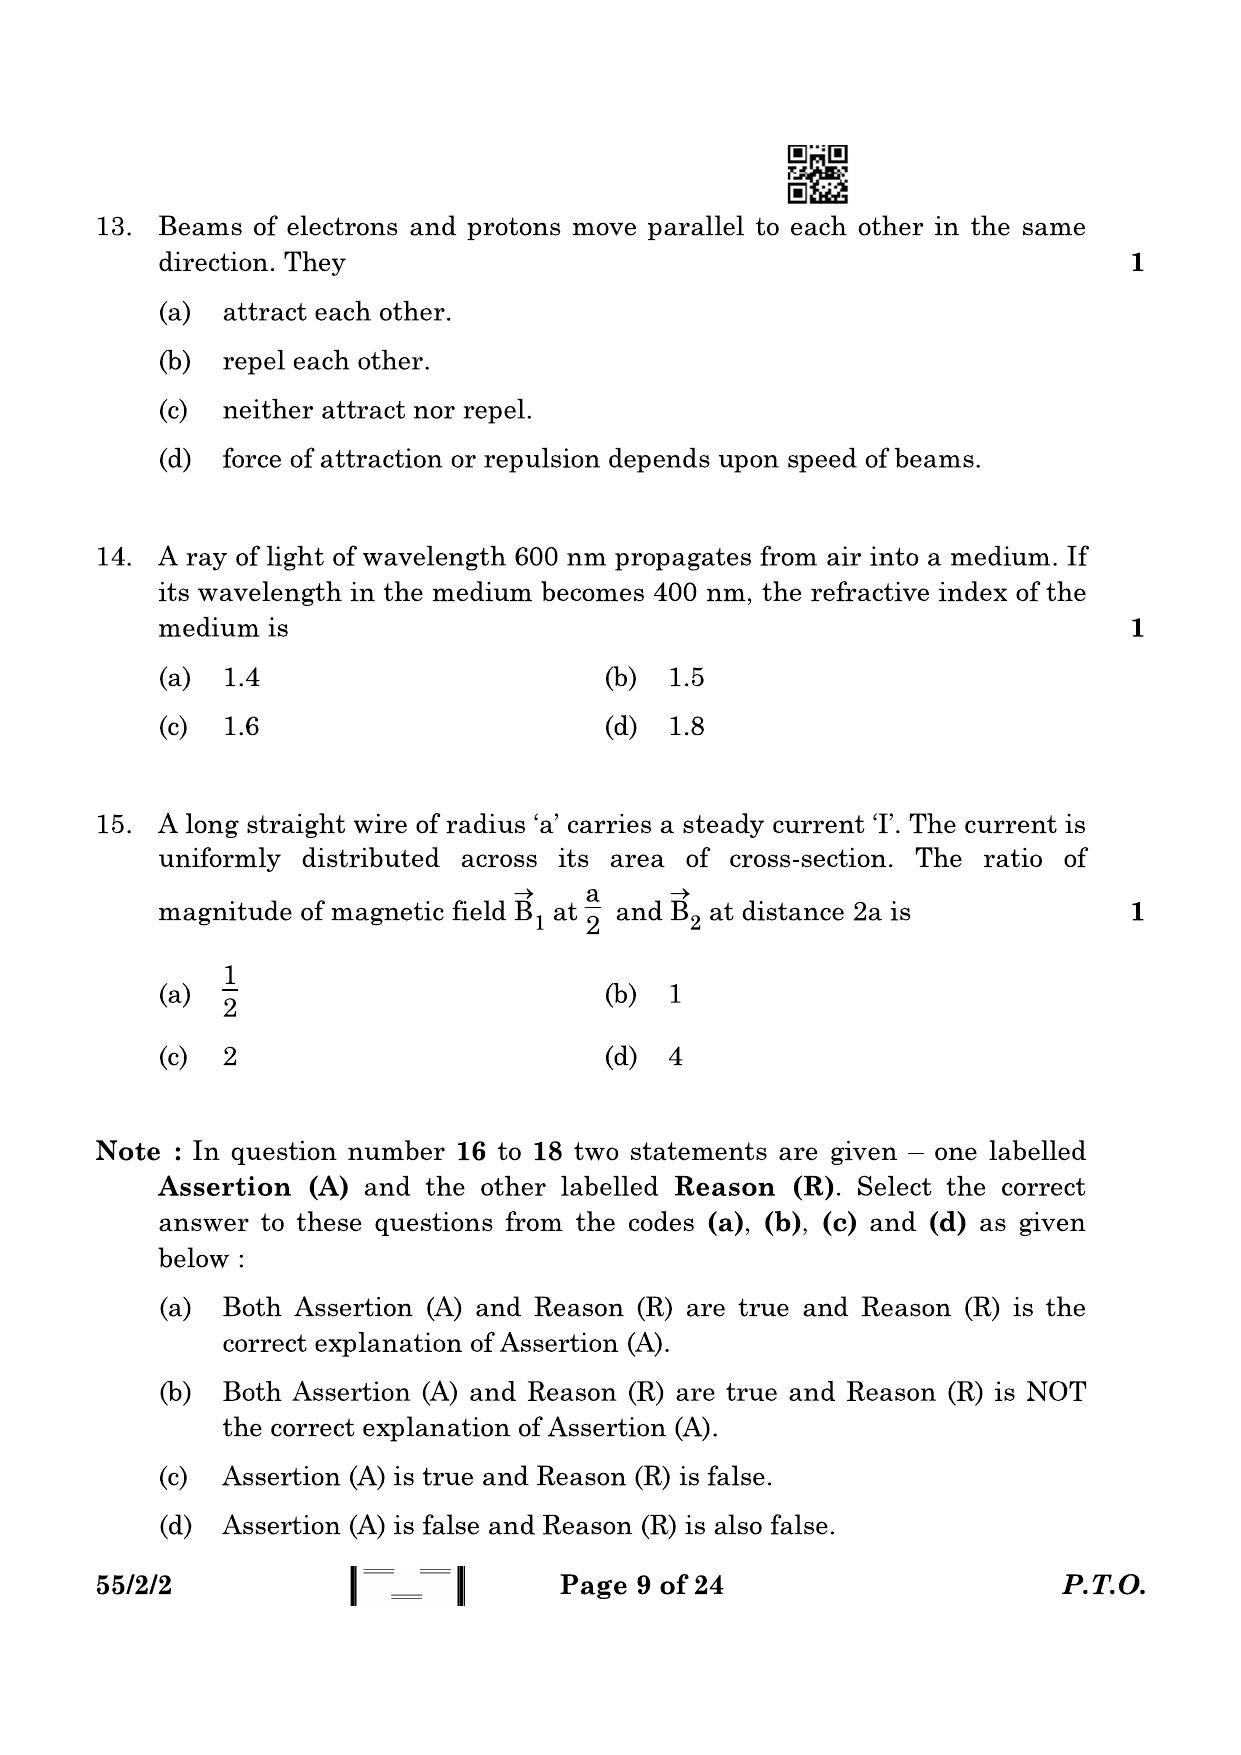 CBSE Class 12 55-2-2 Physics 2023 Question Paper - Page 9